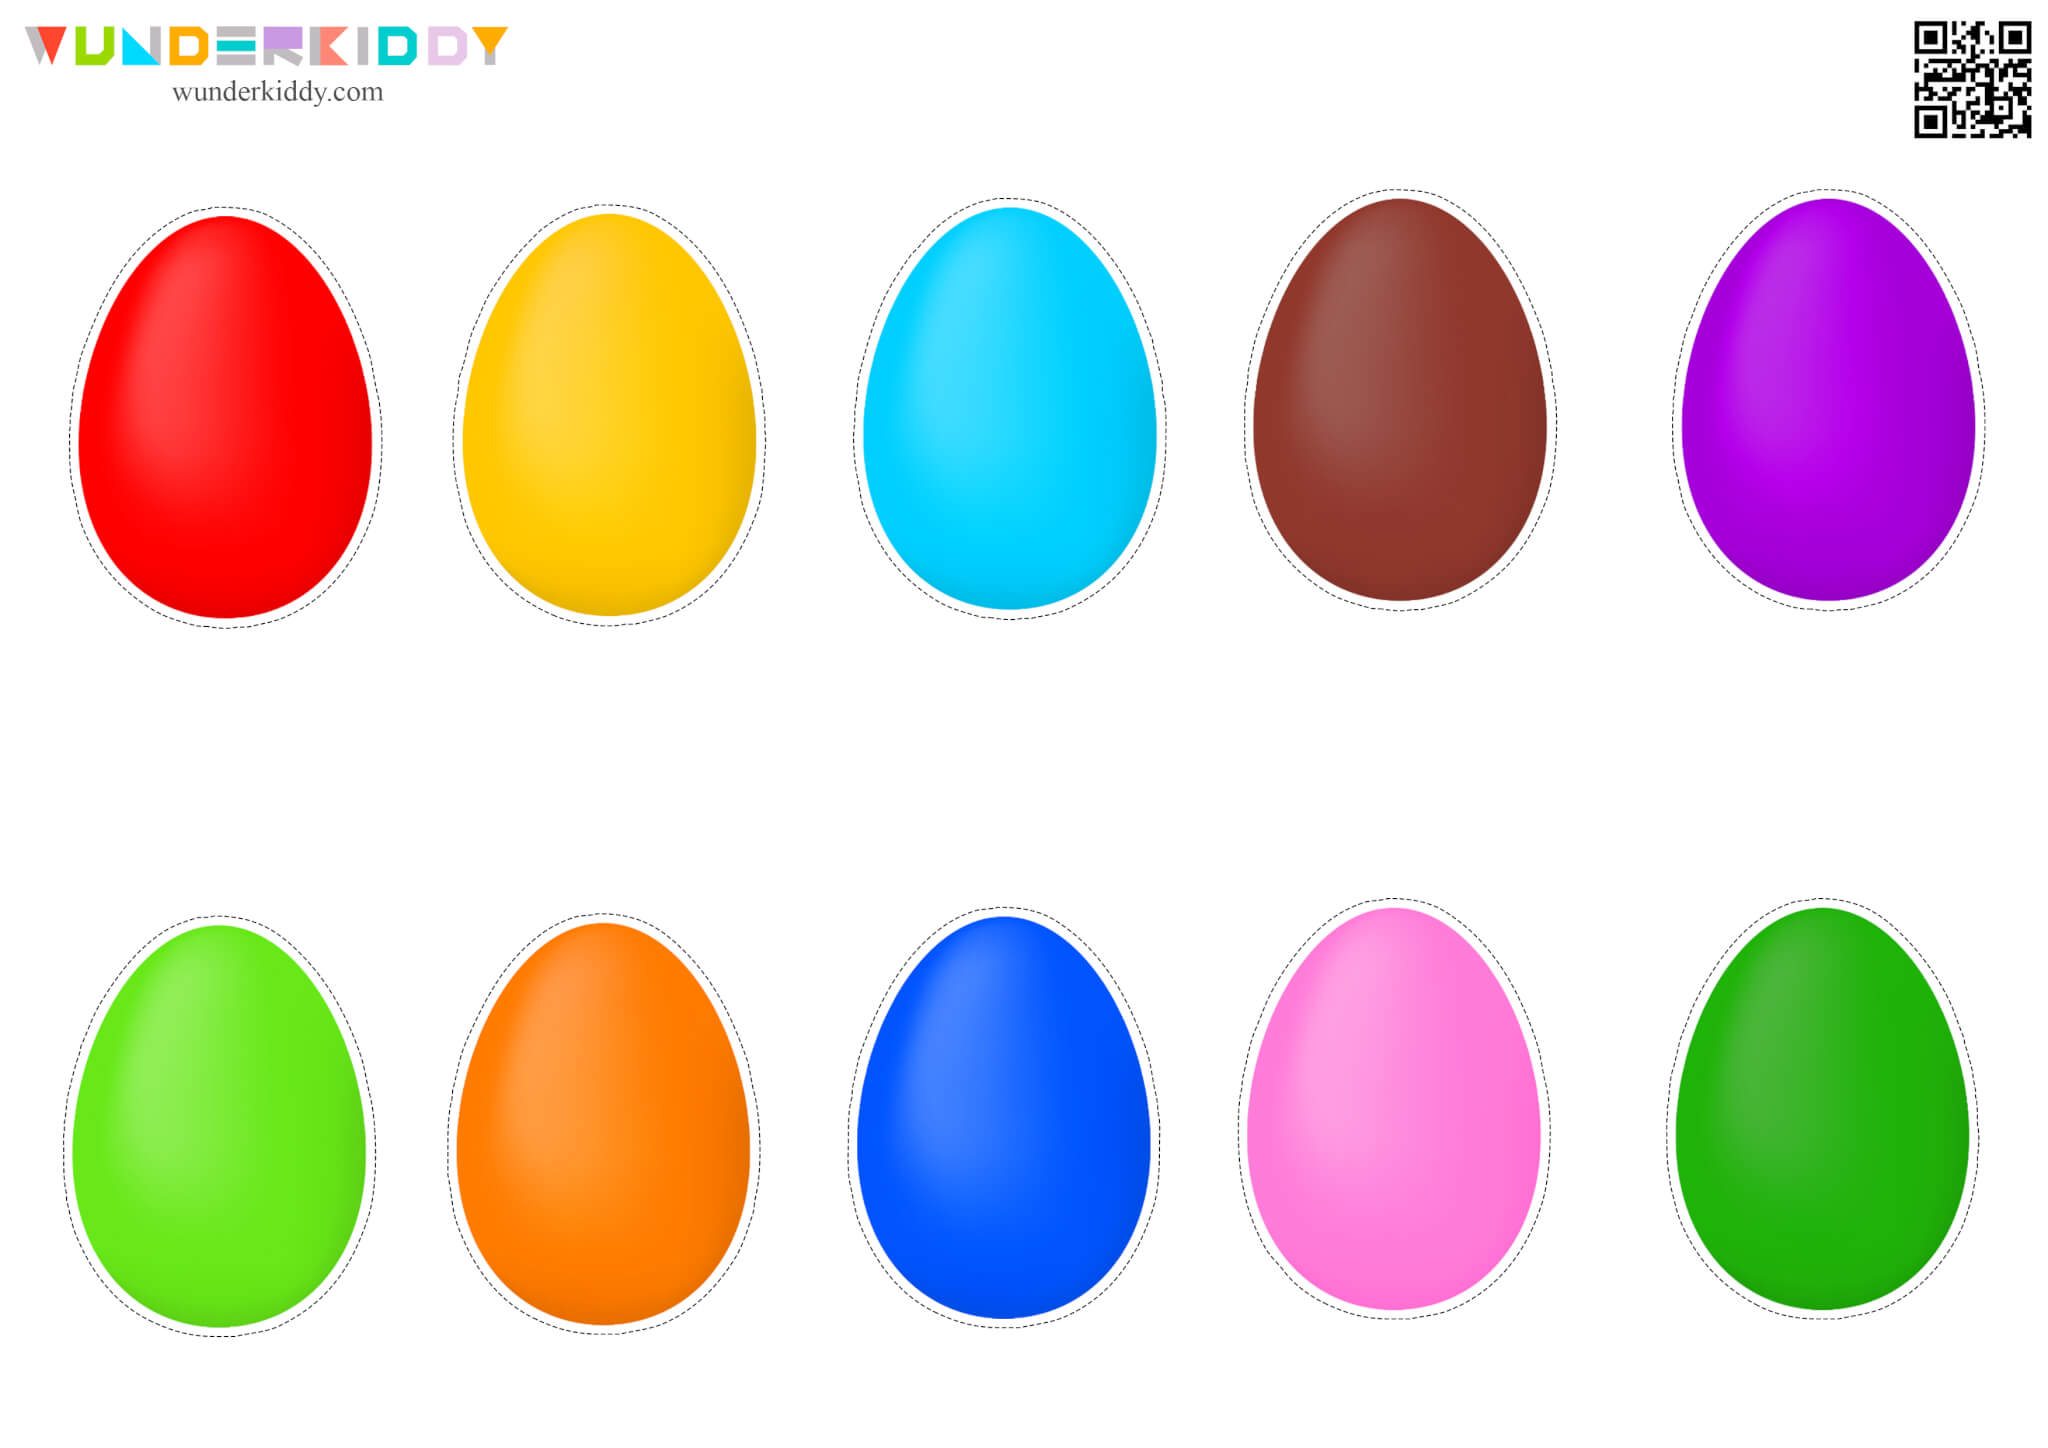 Chicken Eggs Color Match Activity - Image 3